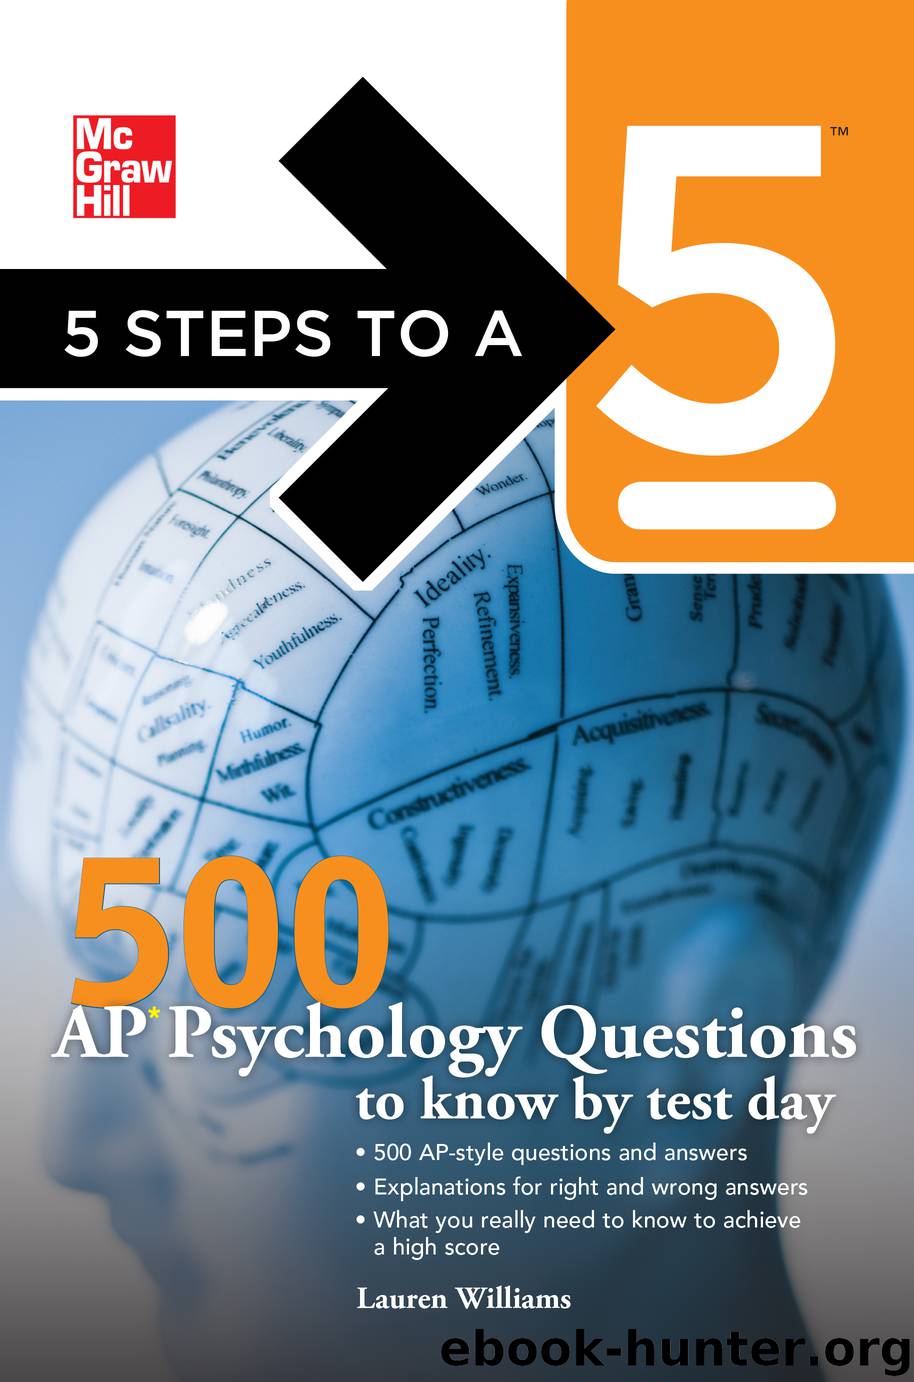 5 Steps to a 5 500 AP Psychology Questions to Know by Test Day by Lauren Williams Thomas A. editor - Evangelist